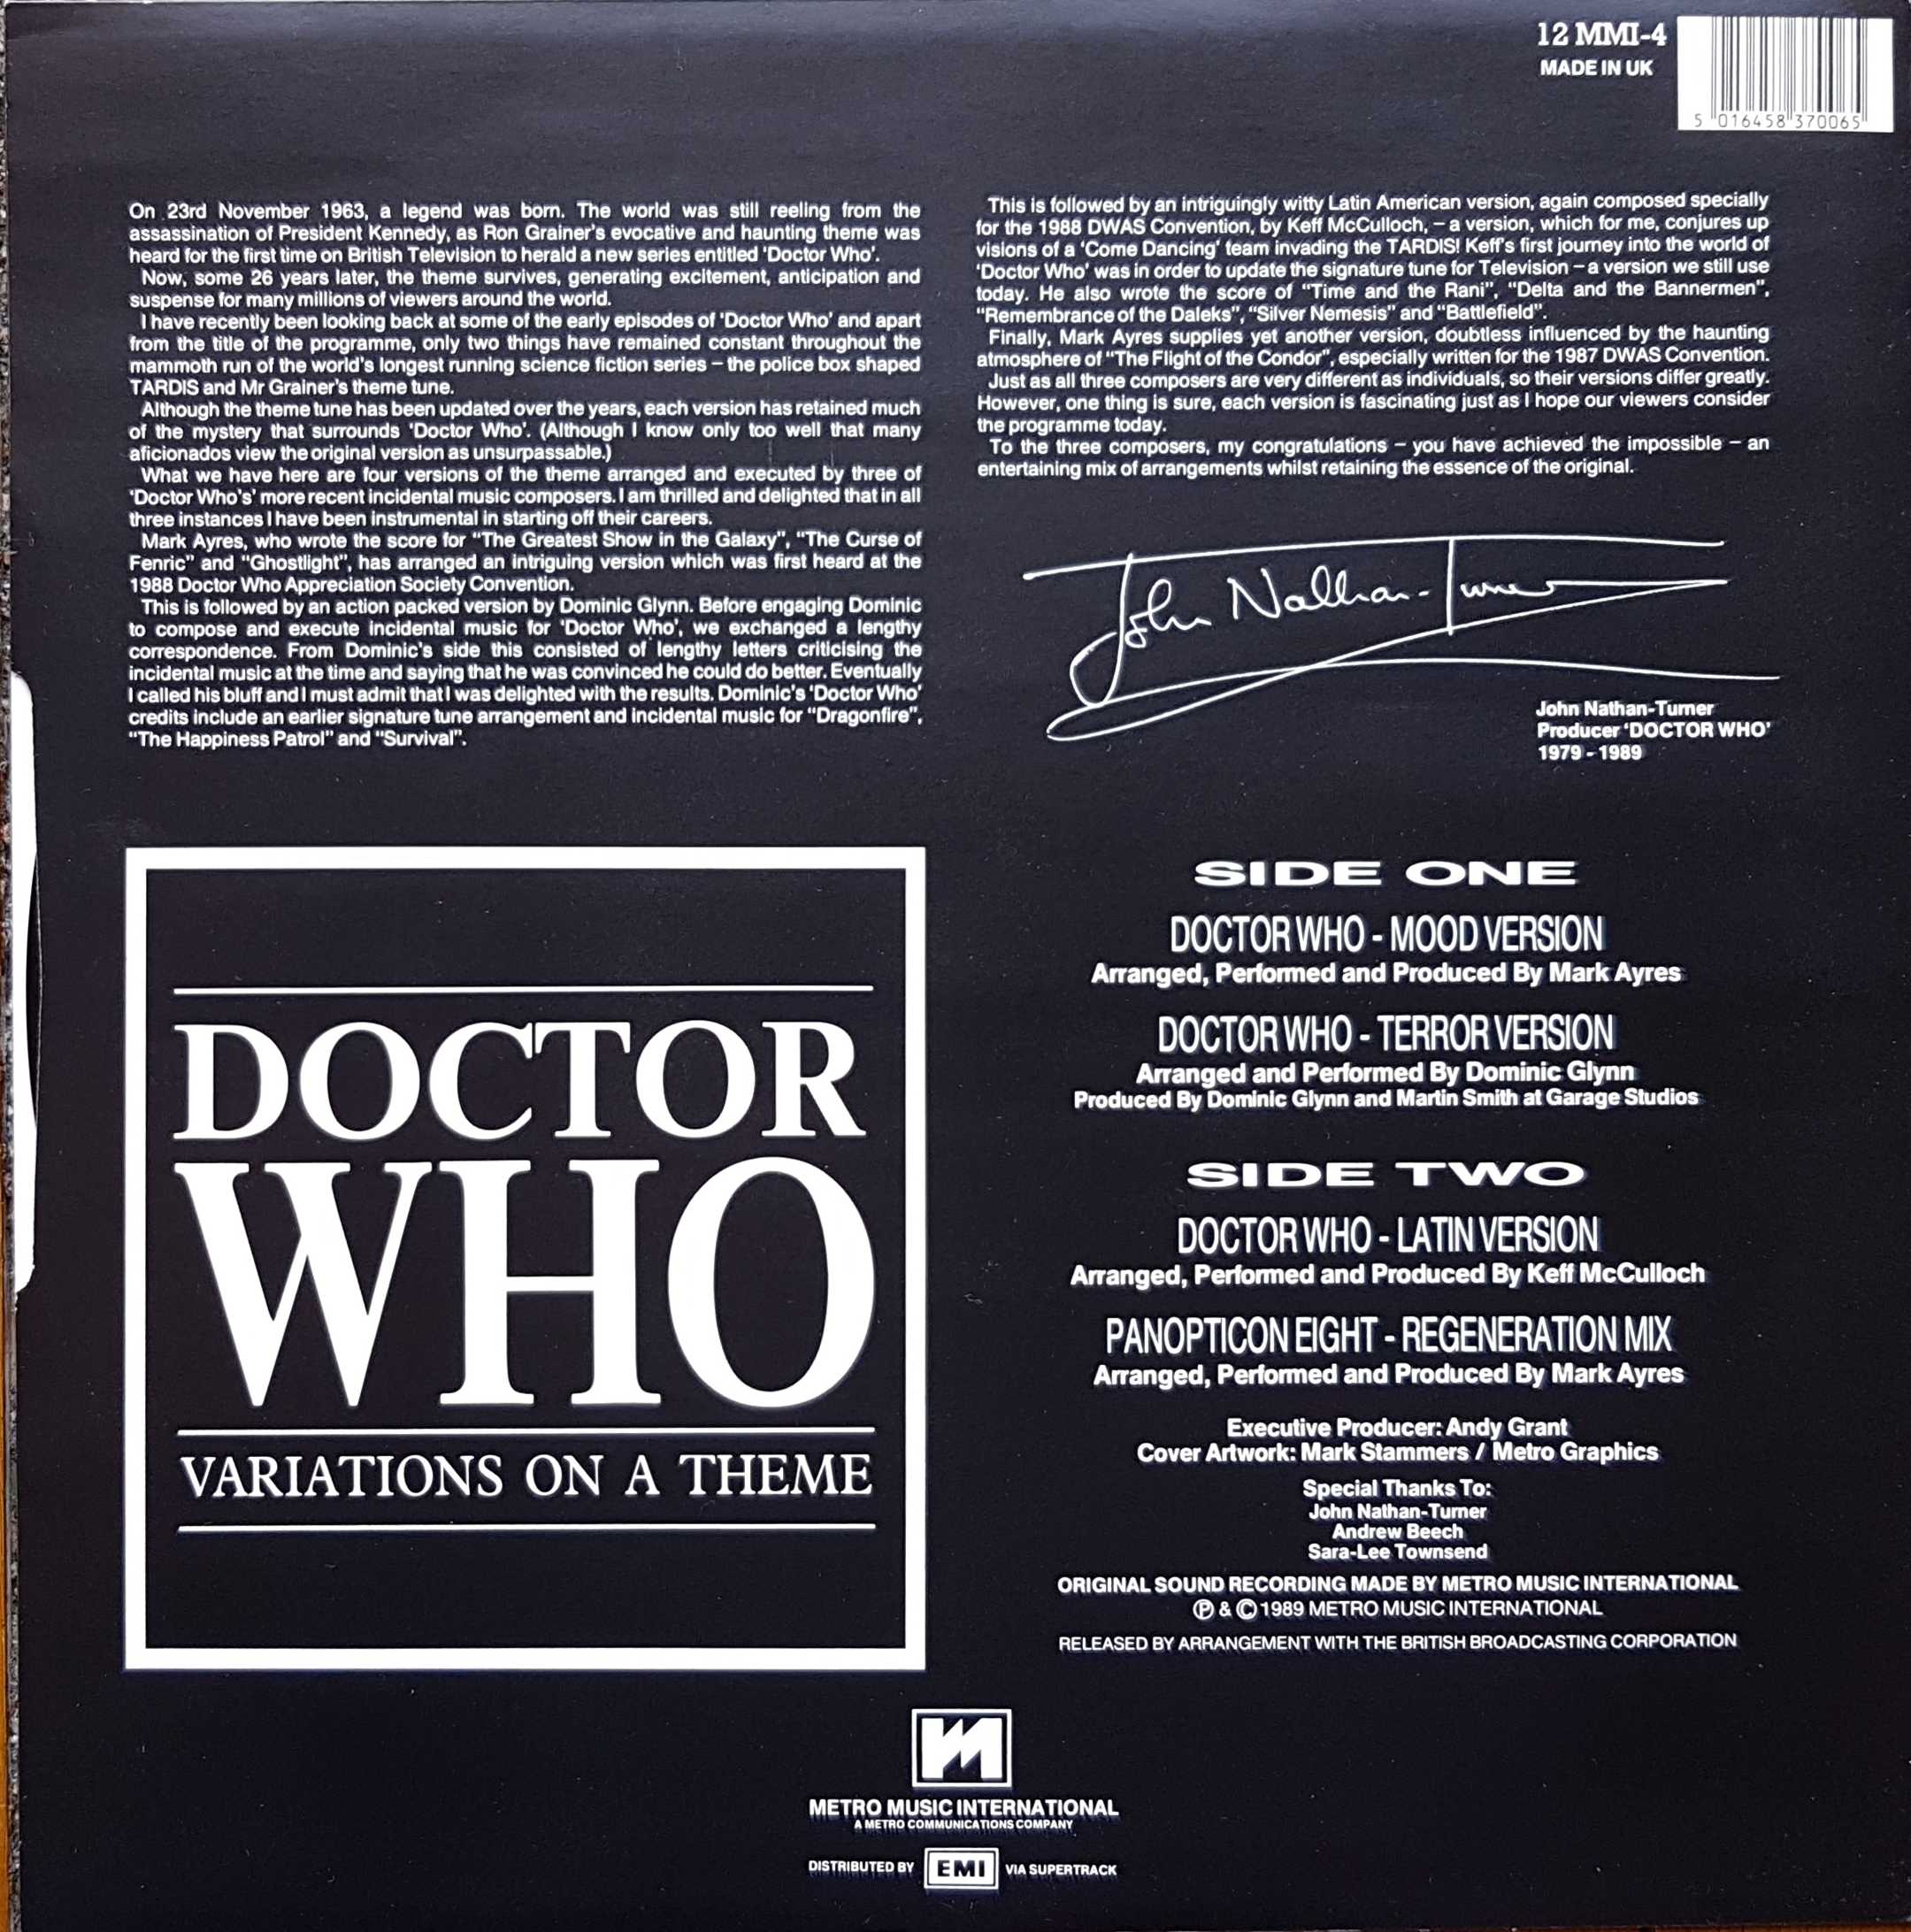 Picture of 12 MMI - 4 Doctor Who - Variations on a theme by artist Ron Grainer from the BBC records and Tapes library